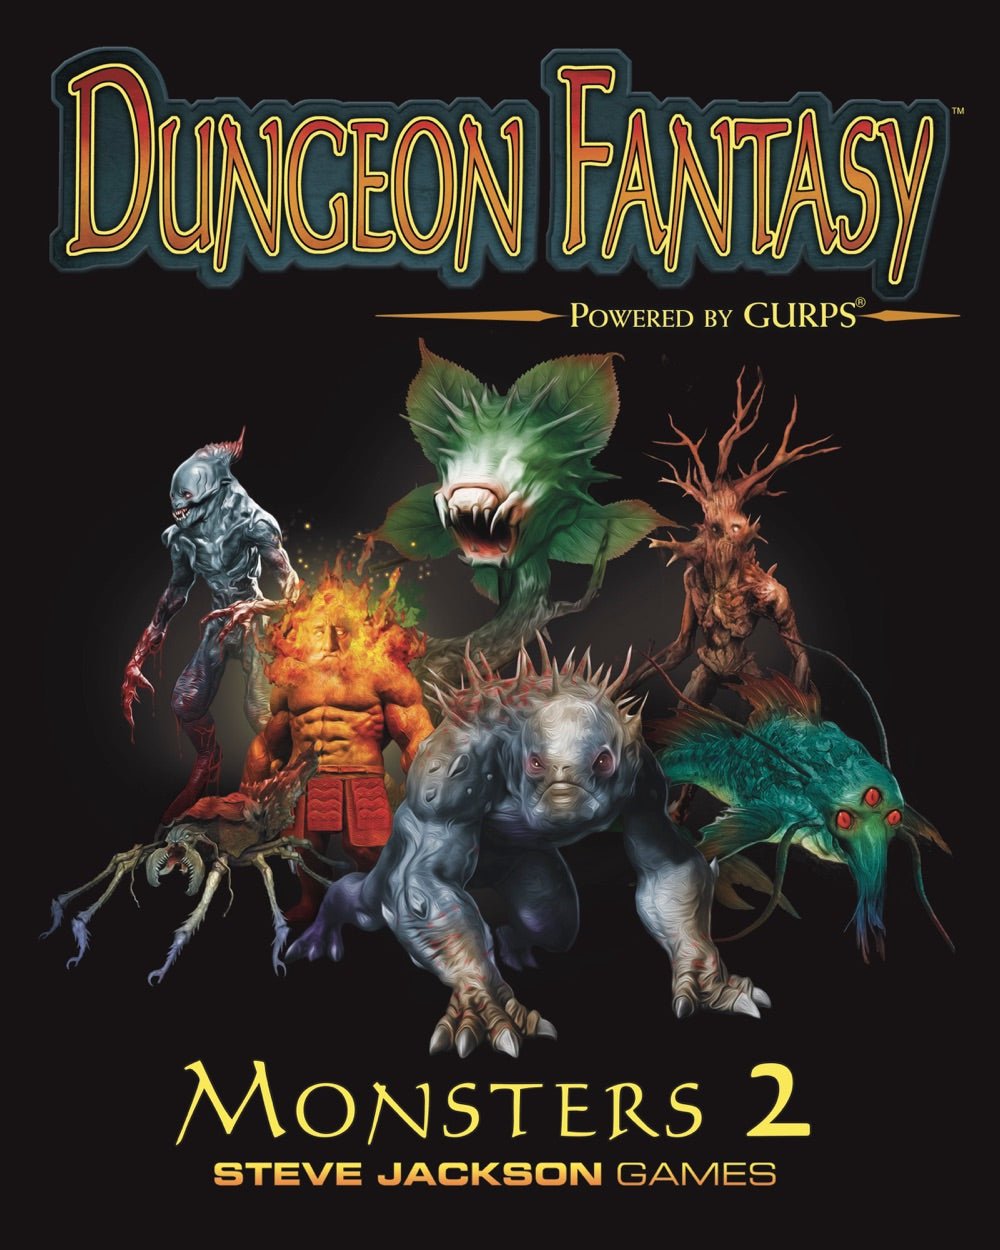 Dungeon Fantasy Monsters 2